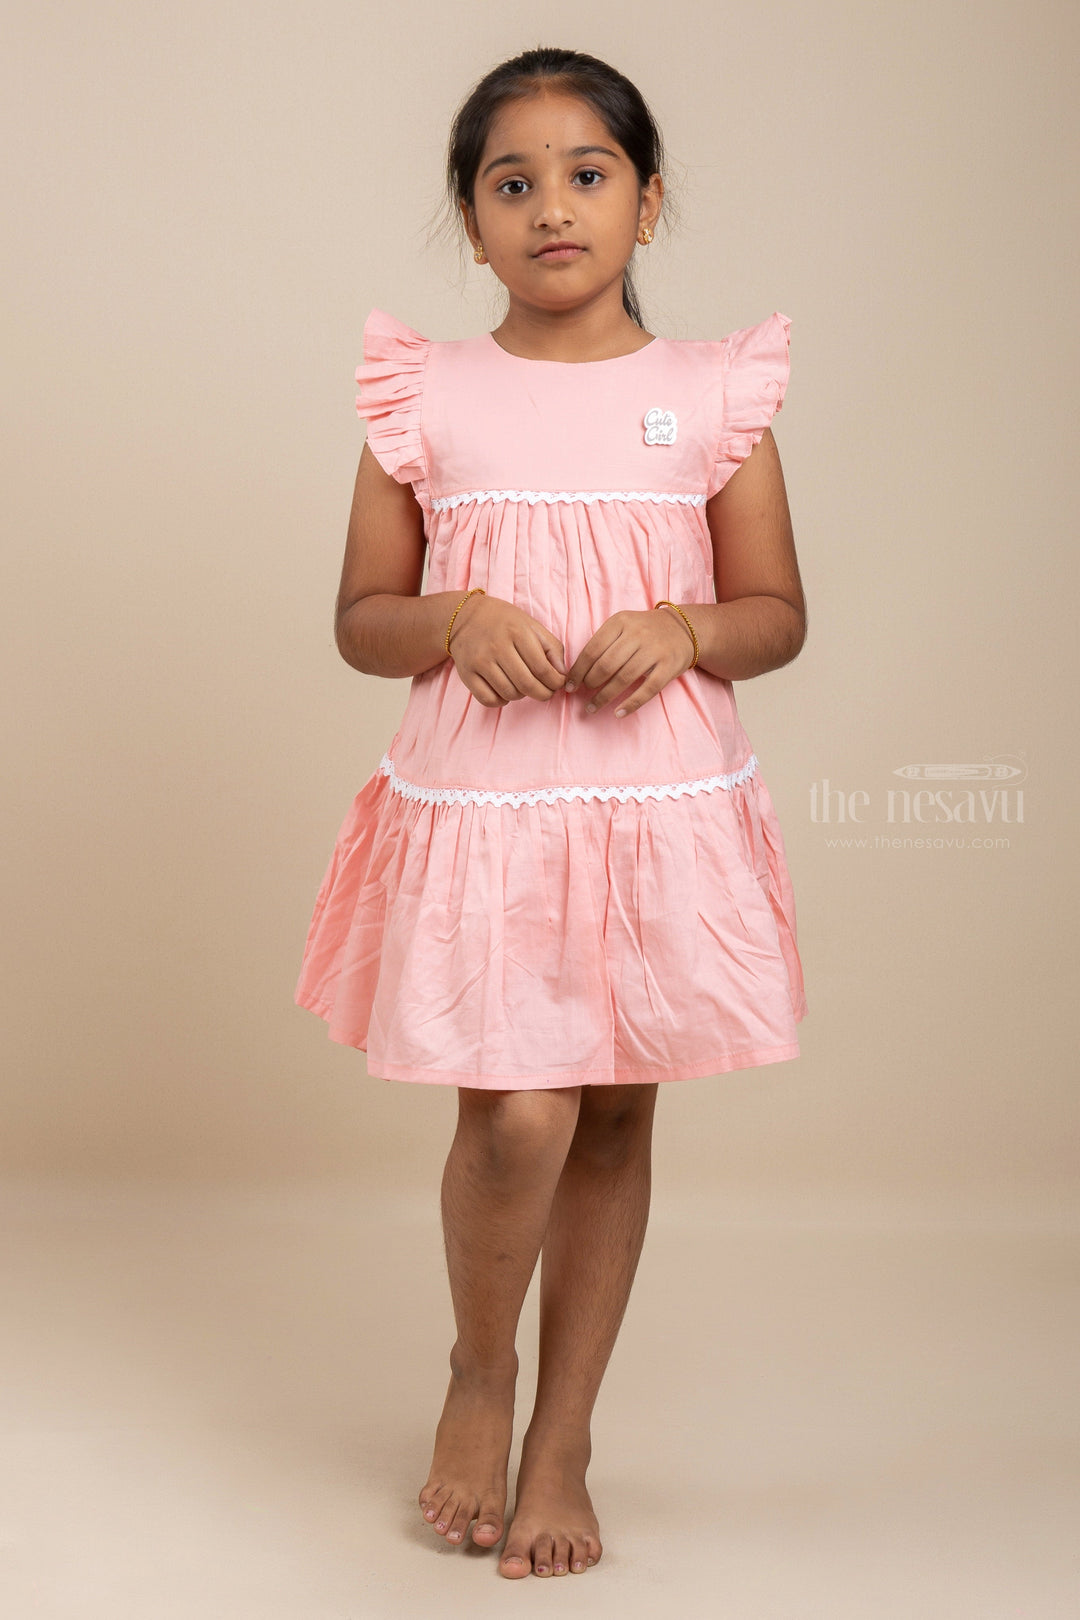 The Nesavu Girls Cotton Frock Blossom Pink - Cottony Cute Frocks With Lace Designs For Little Girls Nesavu 20 (3Y) / Salmon / Cotton GFC949B-20 Pink Frock Dress| Fashion Frock For Girls| The Nesavu